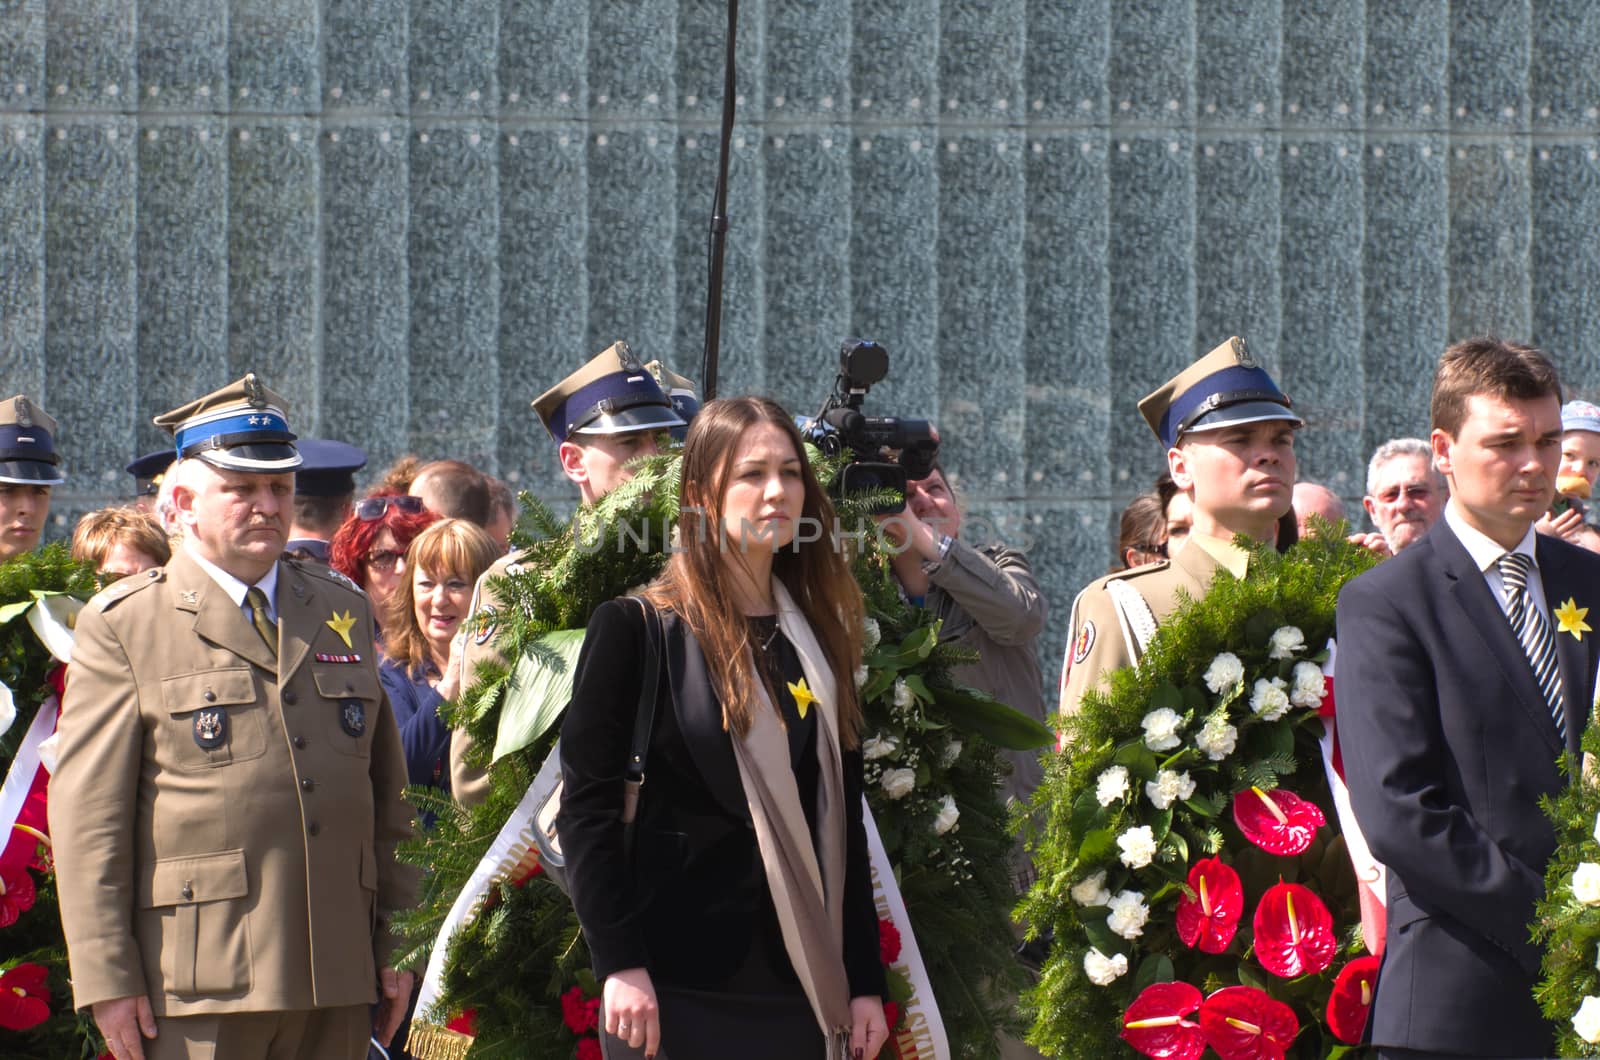 Warsaw, Poland – April 19, 2014: Celebration of the 71 anniversary of the Warsaw Ghetto Uprising. Wreath laying ceremony.